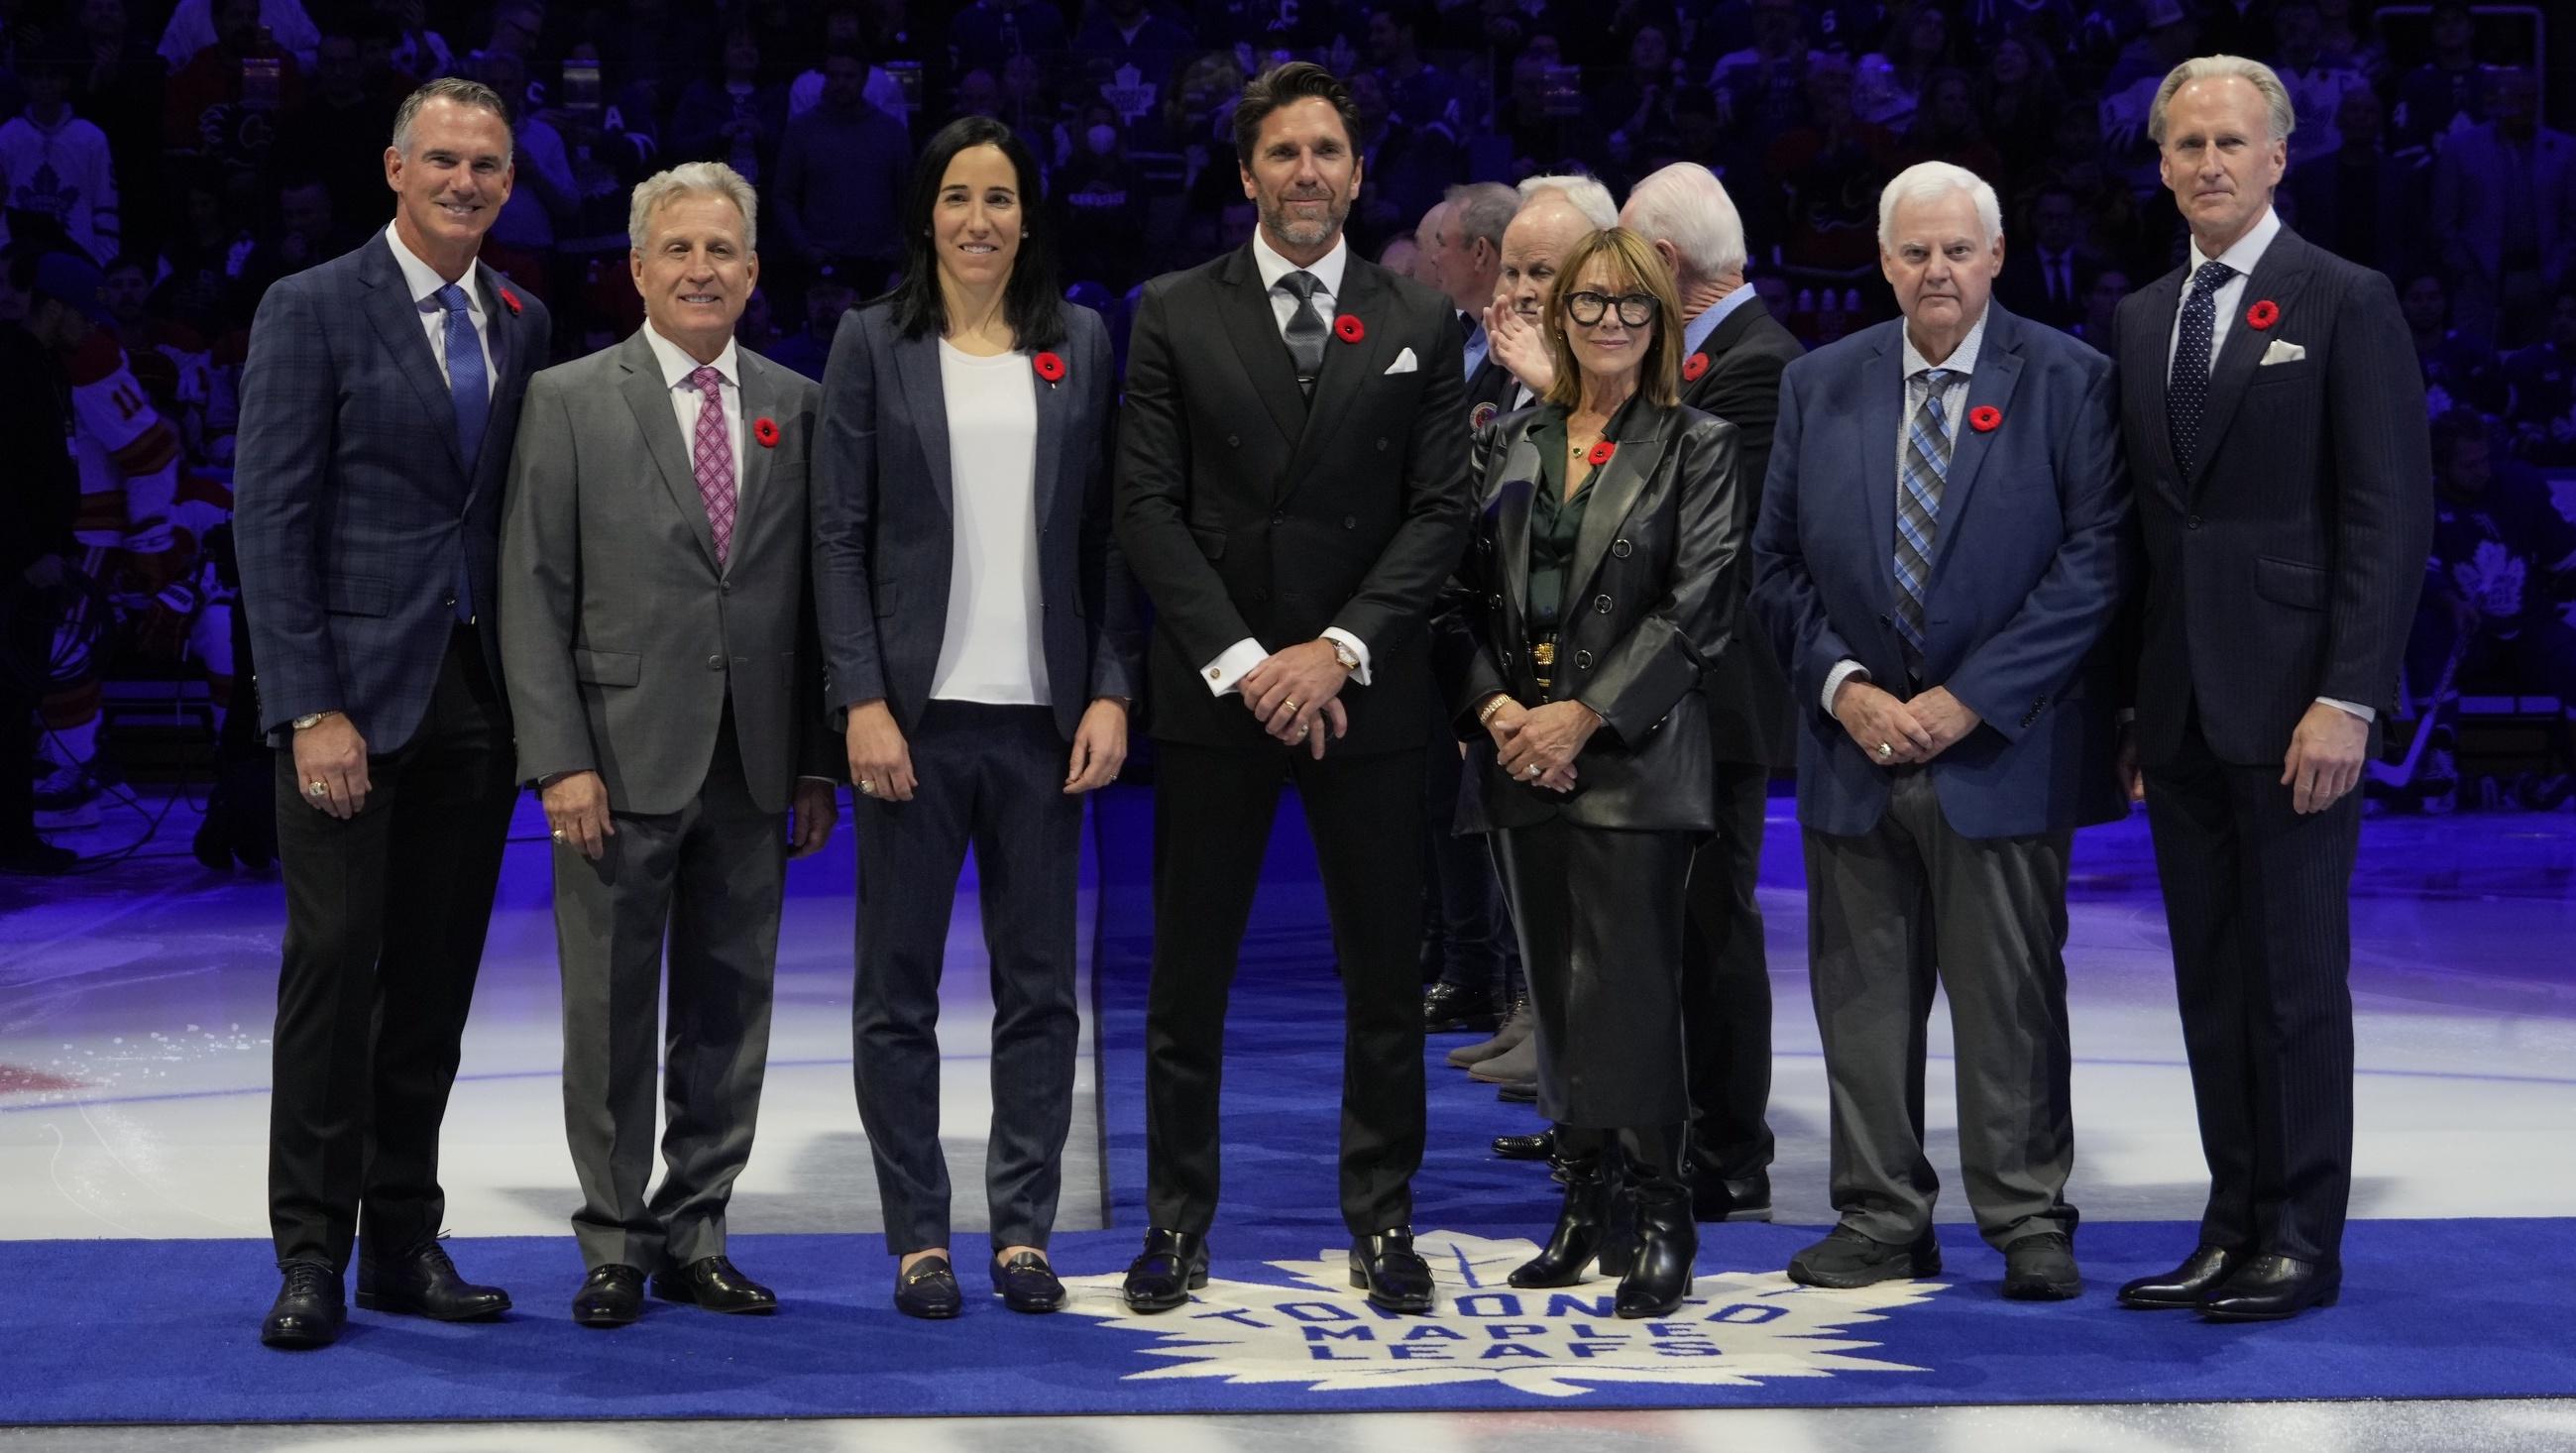 Hockey Hall of Fame Class of 2023 inductees Pierre Turgeon, Mike Vernon, Caroline Ouellette, Henrik Lundqvist, Coco Lacroix for her husband Pierre , Ken Hitchcock, and Tom Barrasso (left to right) before the start of the game between the Calgary Flames and Toronto Maple Leafs at Scotiabank Arena. / John E. Sokolowski-USA TODAY Sports